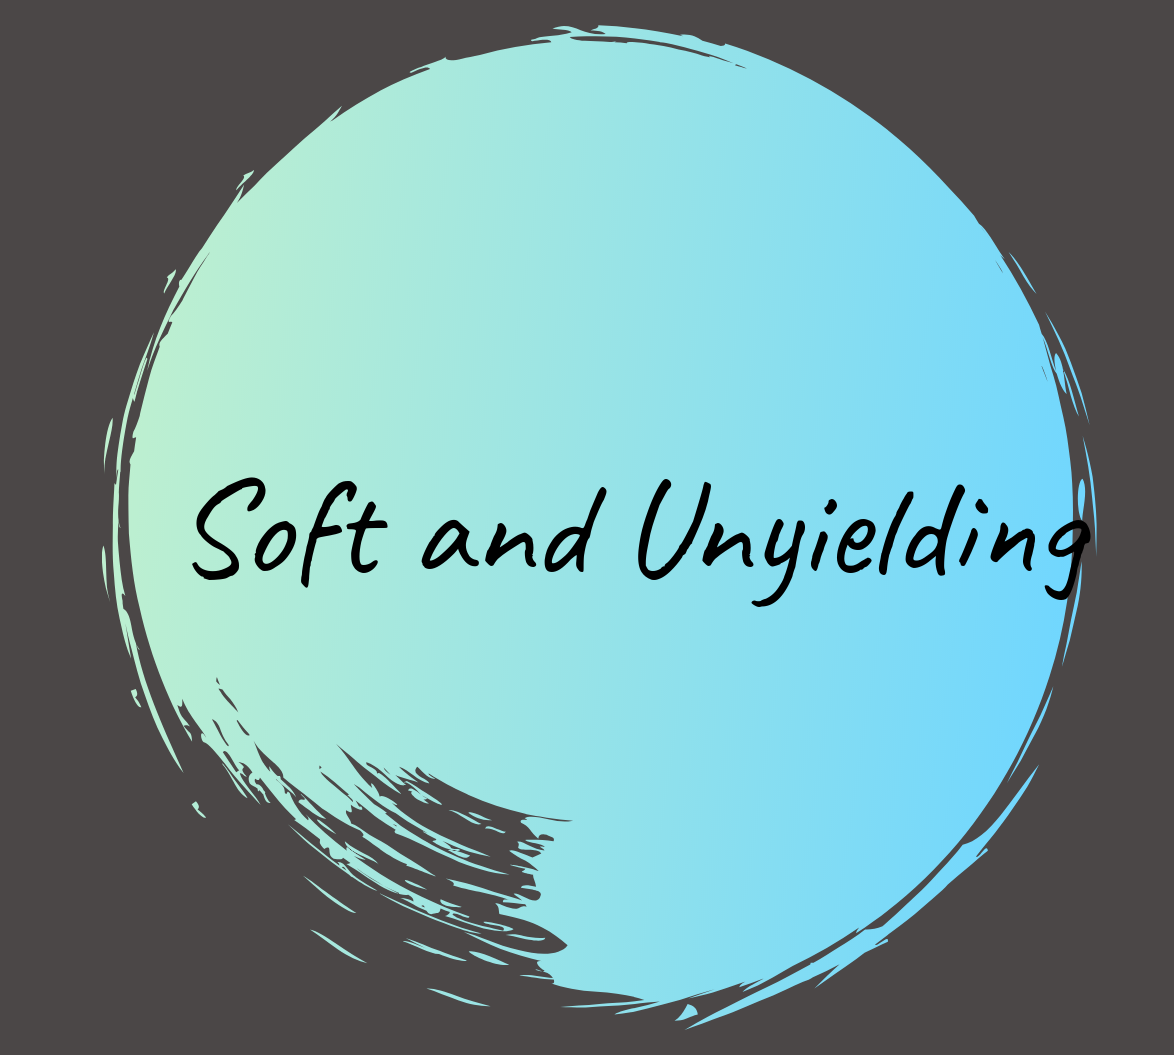 Soft and Unyielding